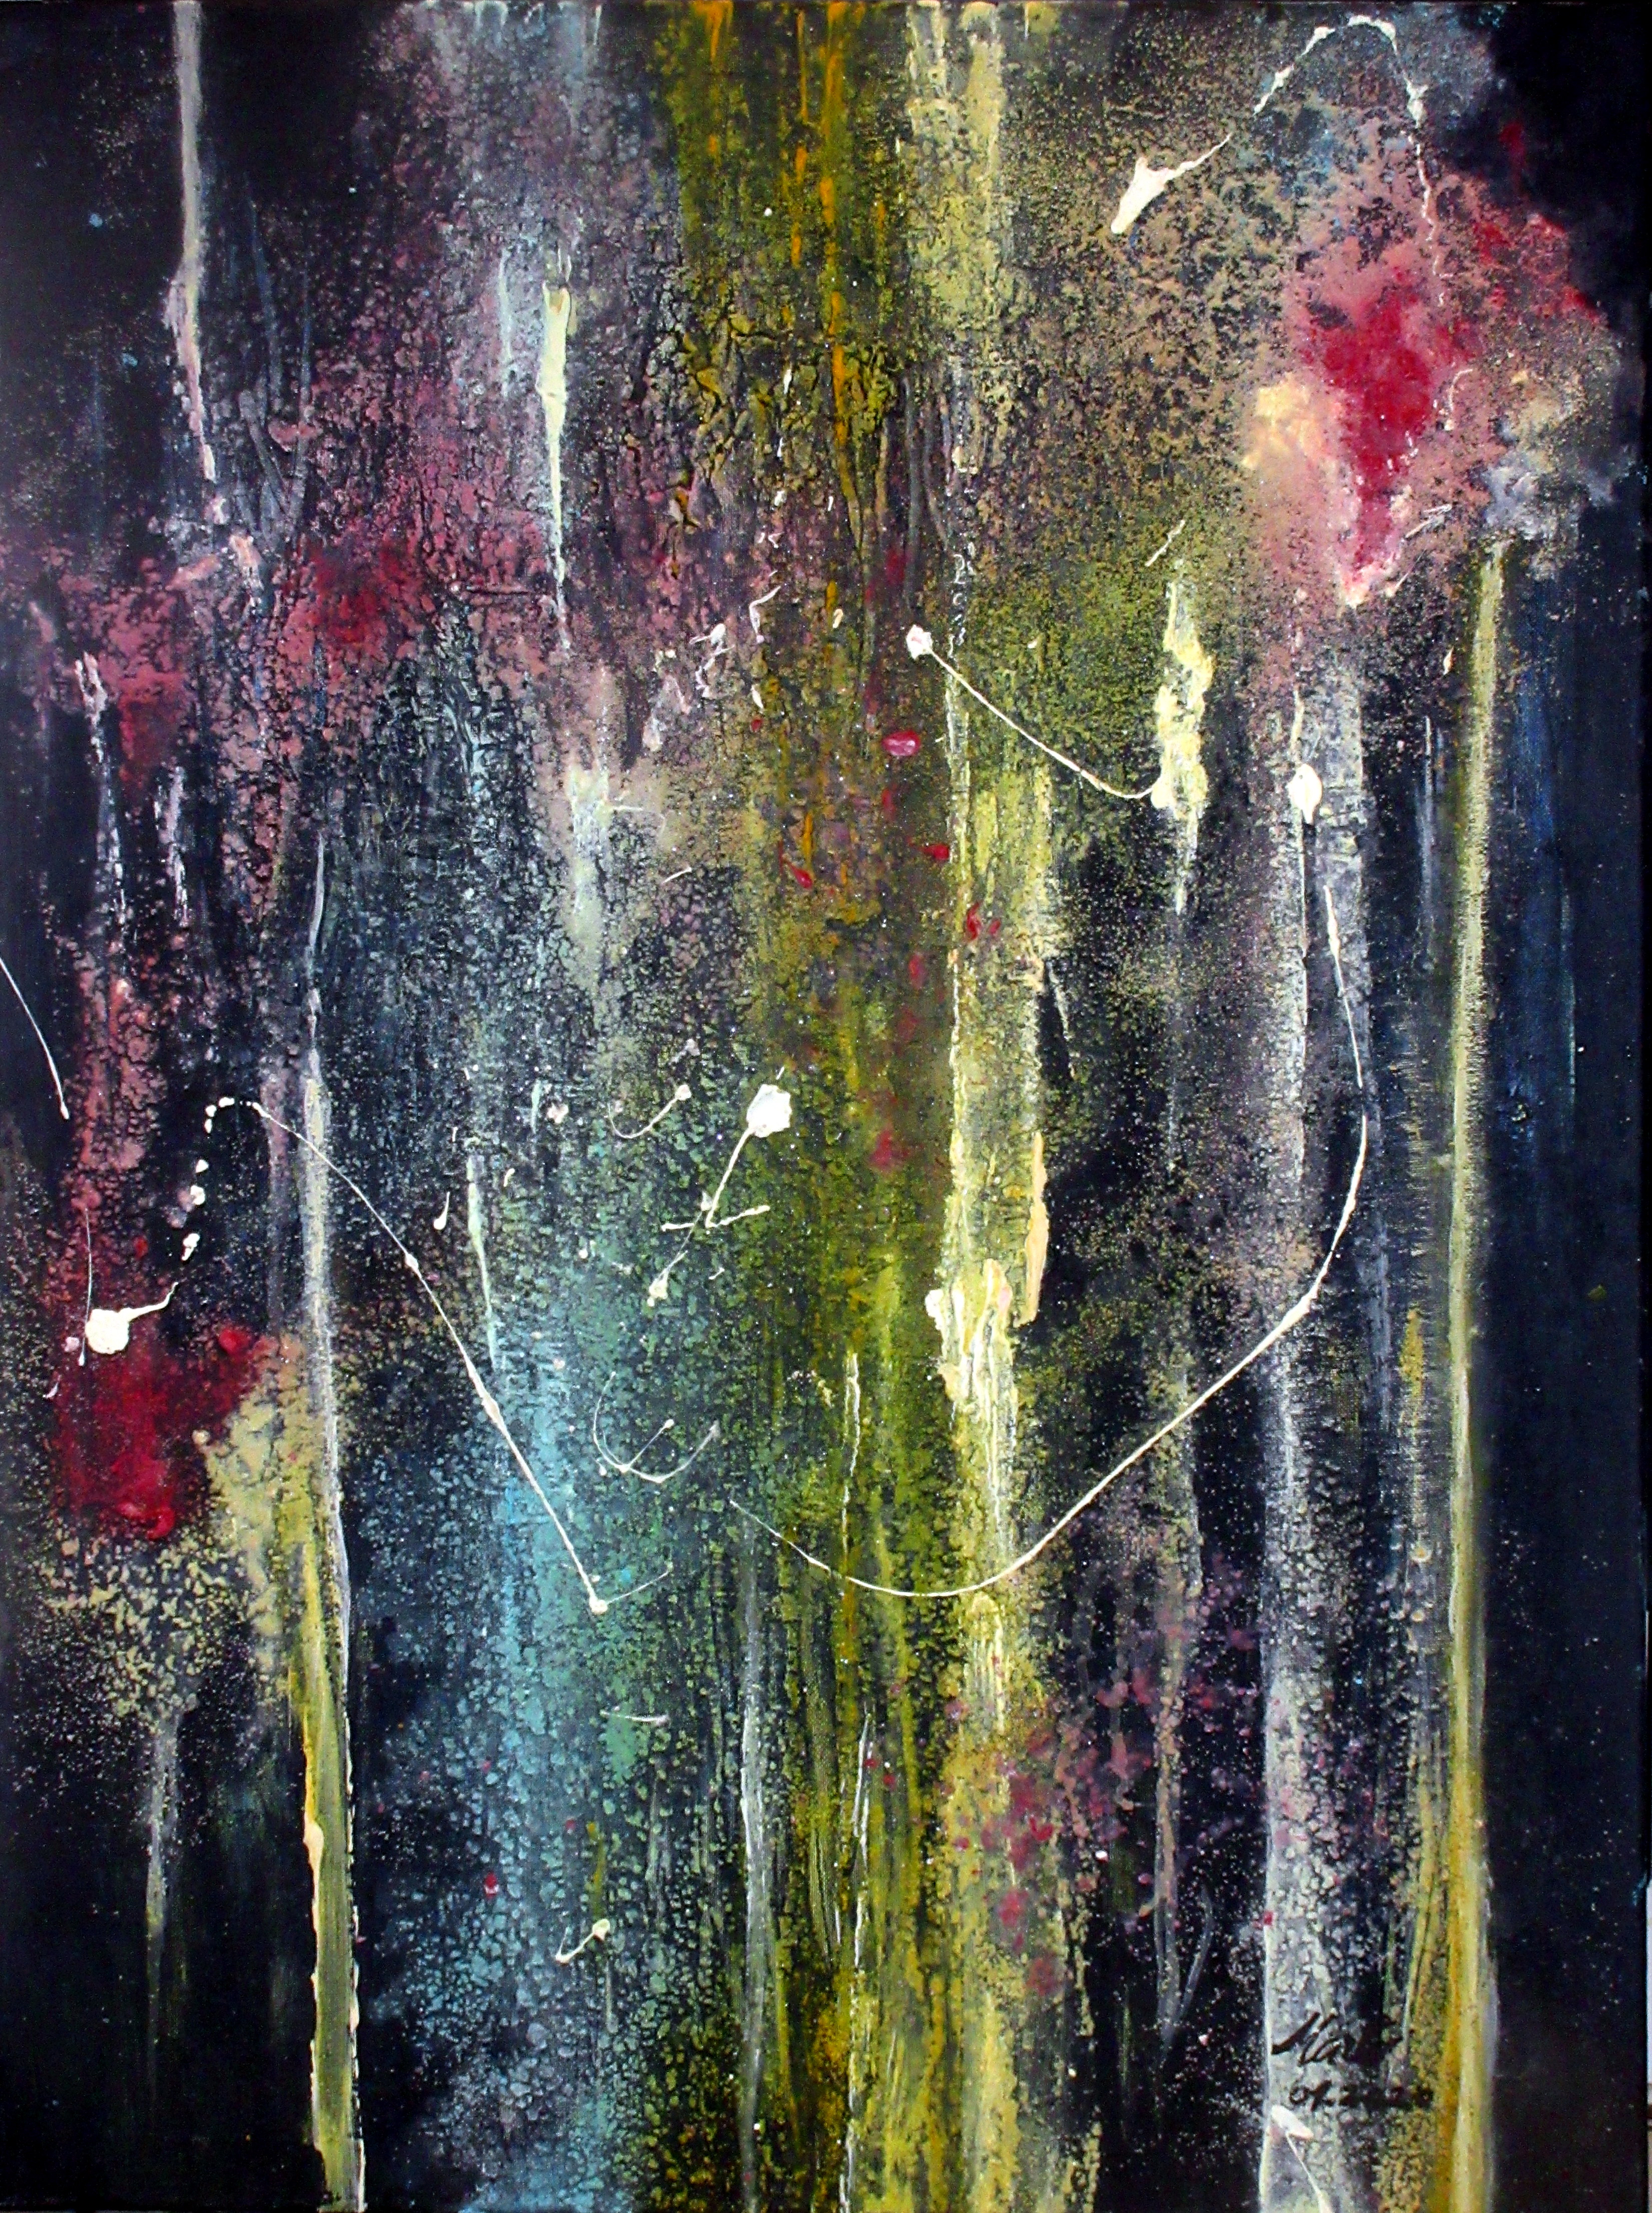 Looking at Infinity - Guardando l'Infinito nel cielo notturno. Acrylic on canvas. 80 cm H x 60 m W x 2 cm D. 01.2020